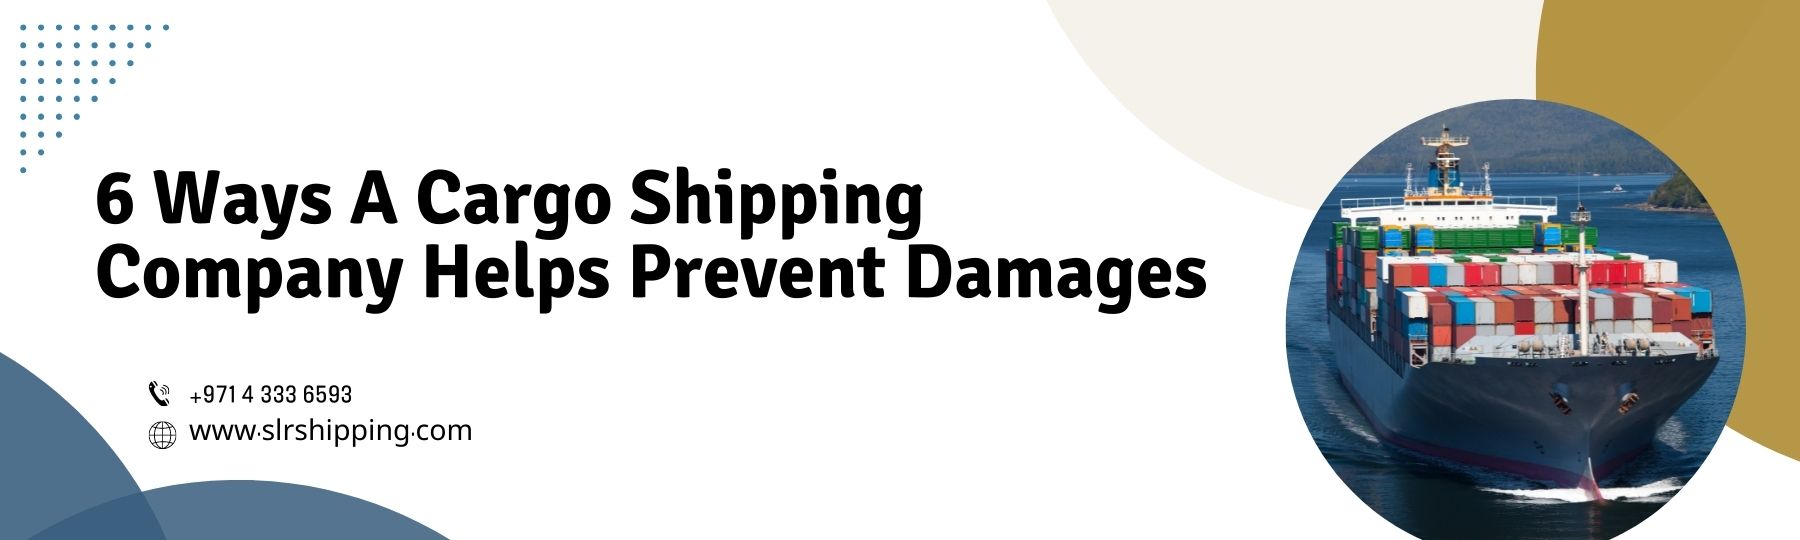 How to Prevent Damages Using a Cargo Shipping Company?